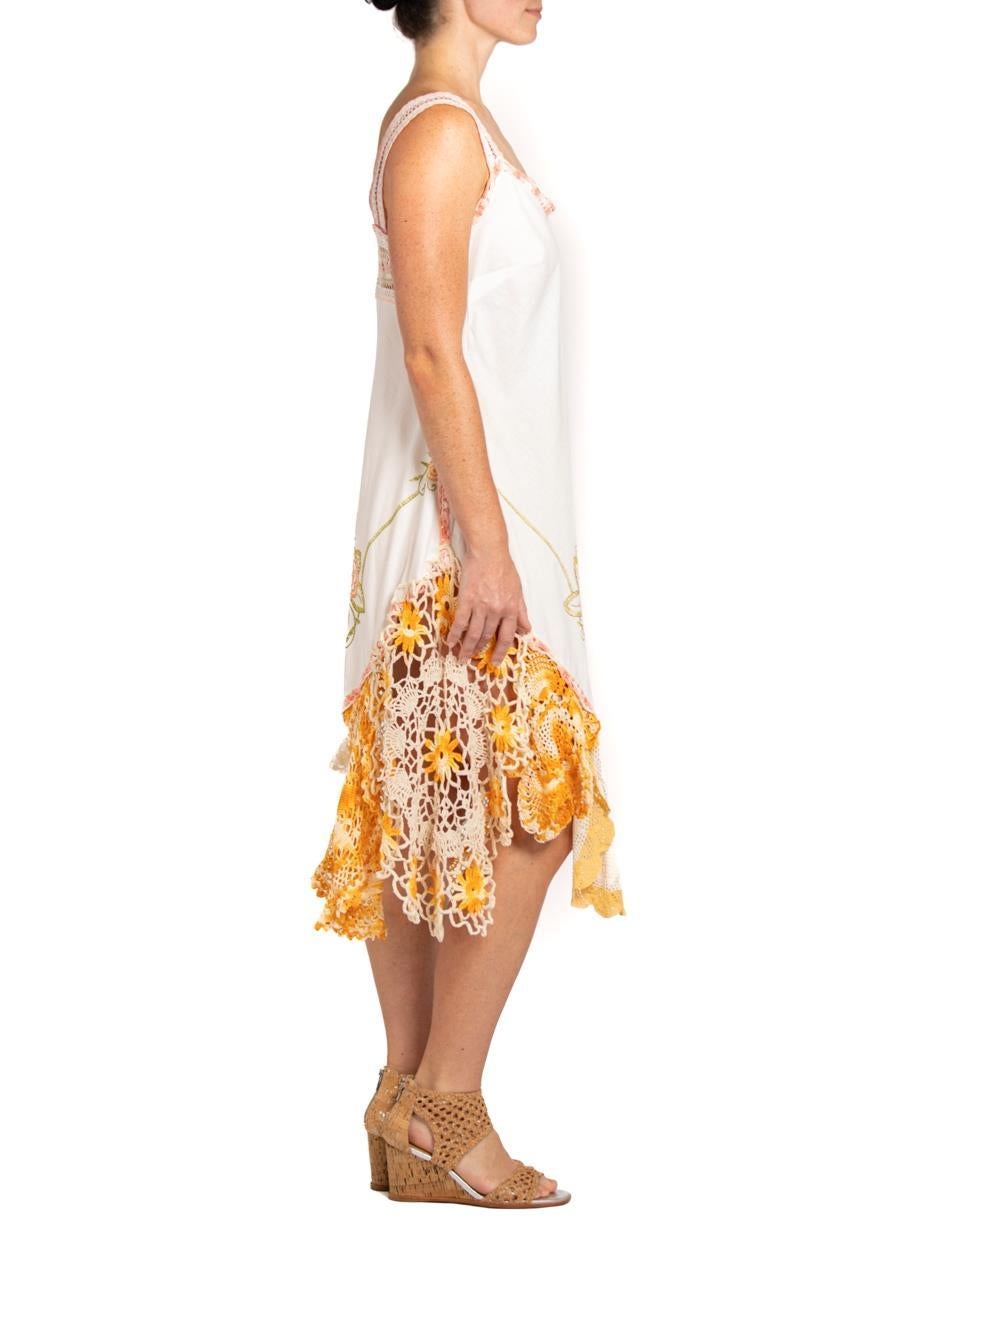 Women's MORPHEW COLLECTION White  & Orange Cotton Blend With Handmade Crochet Dress For Sale